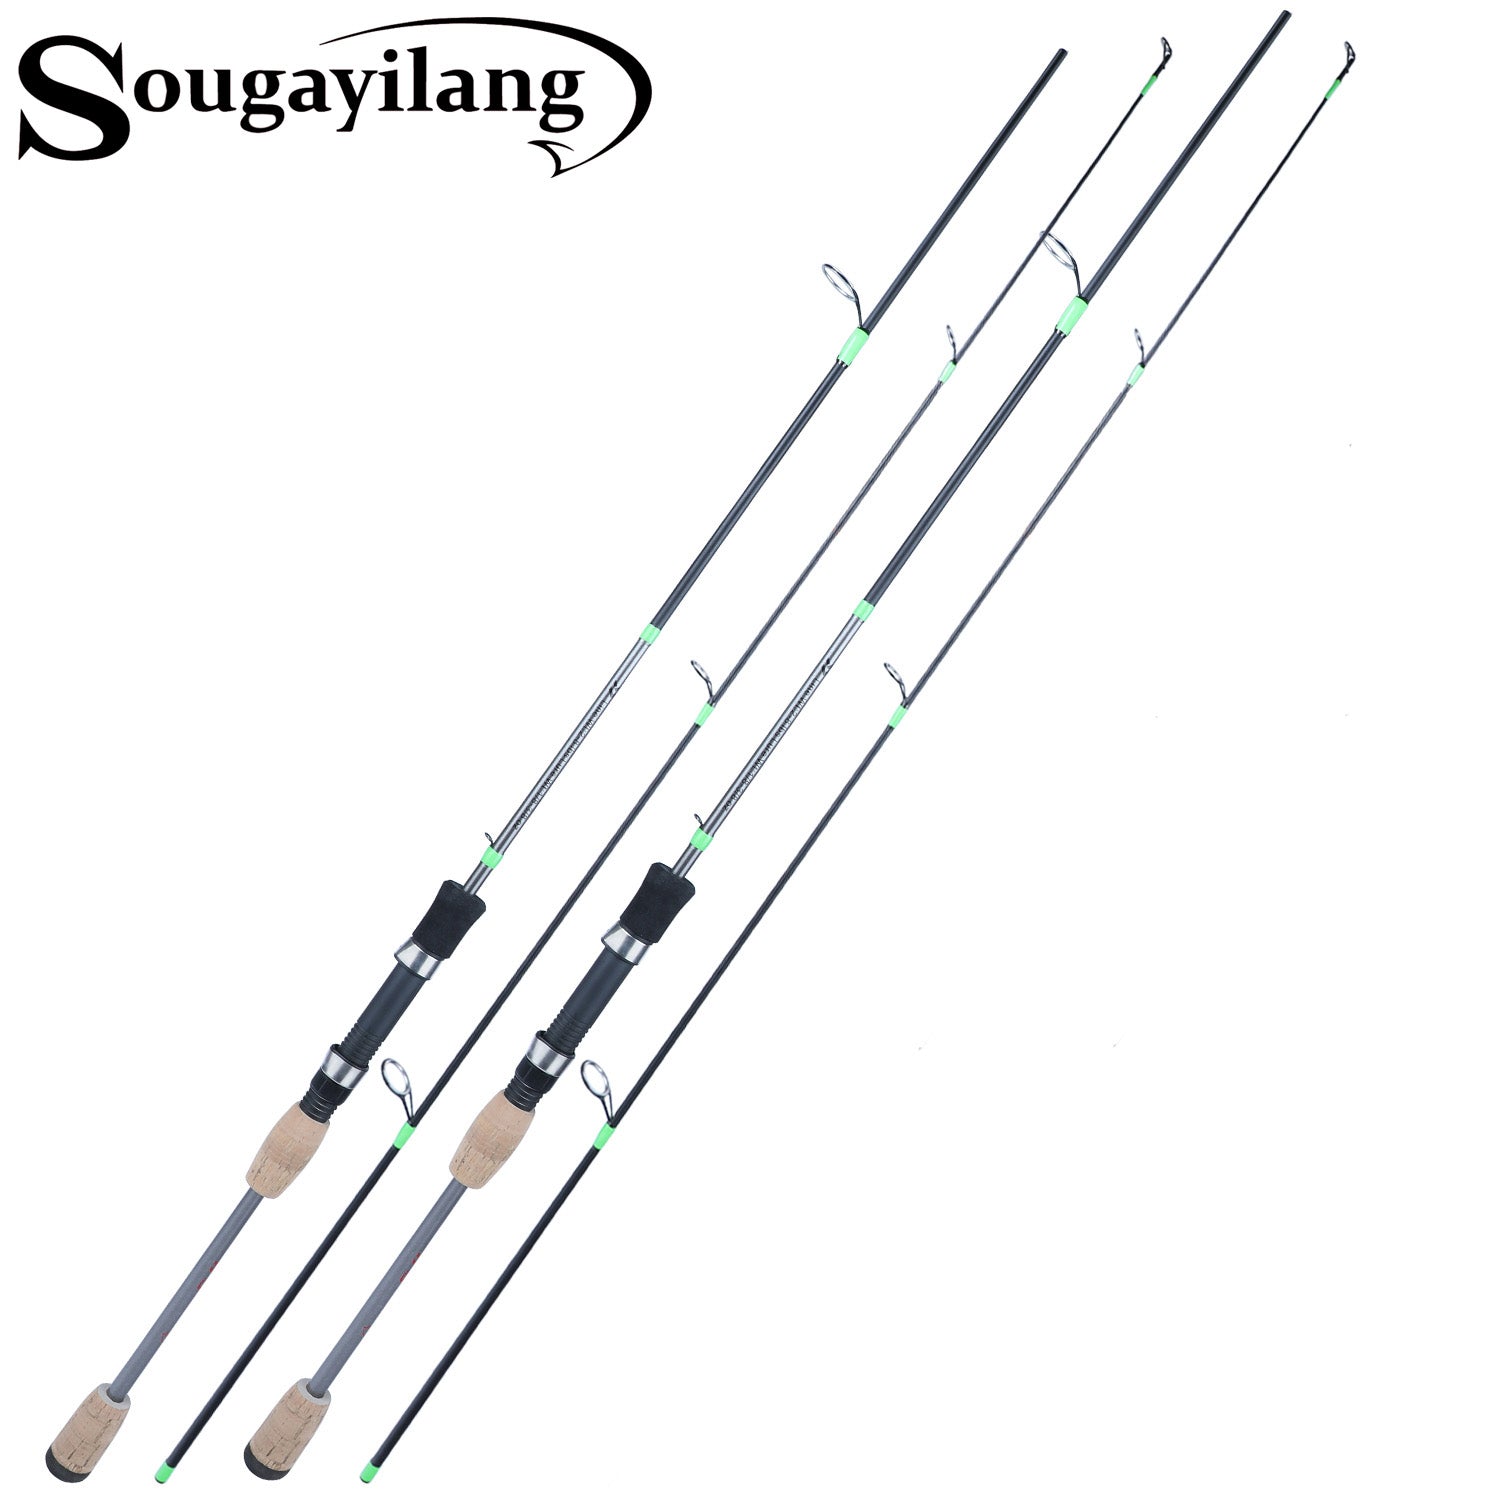 Sougayilang Flexible Fishing Rods, Spinning Rods & Casting Rods,  Lightweight Trout Rods 2 Pieces Cork Handle Crappie Fishing